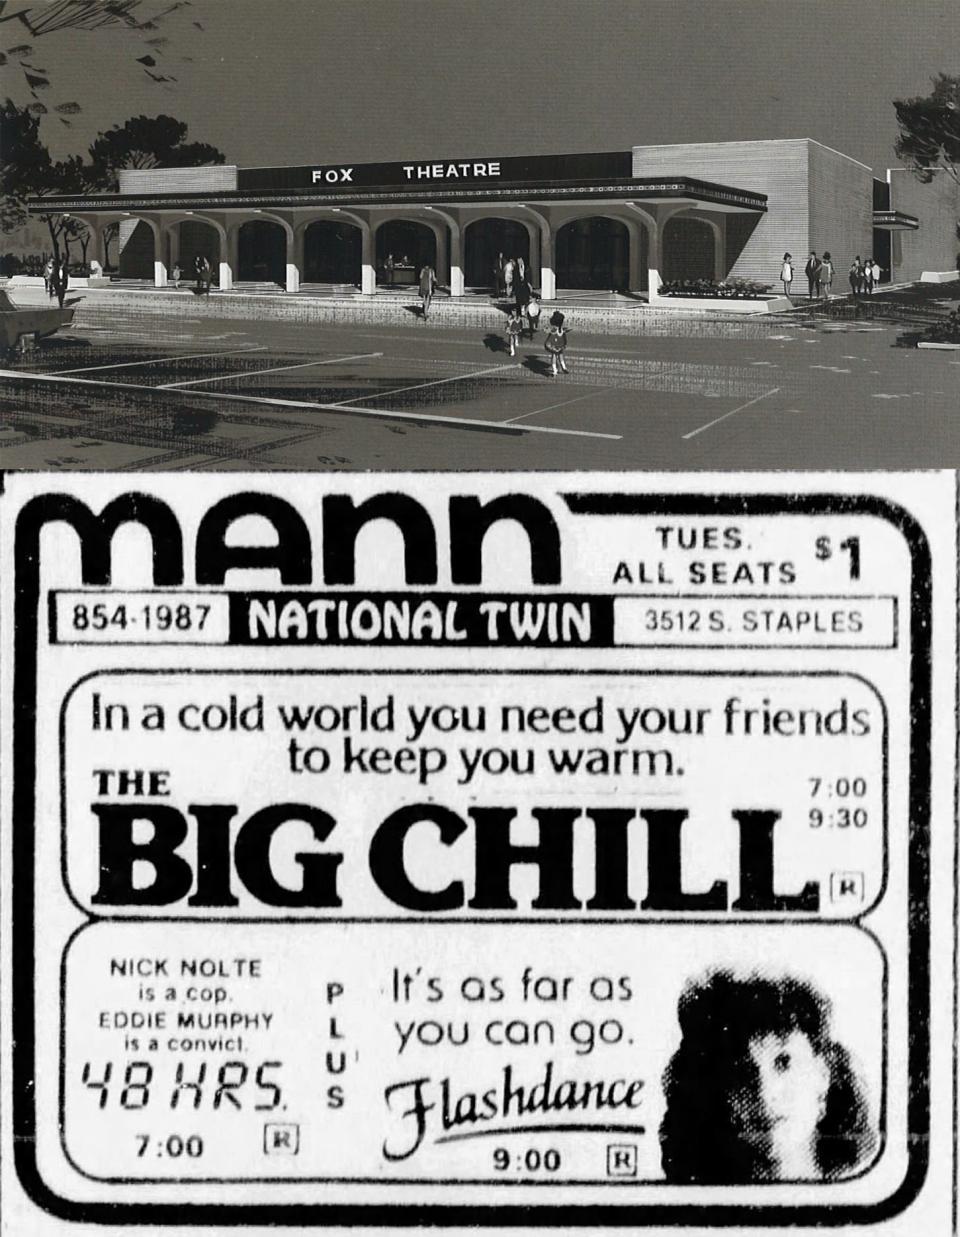 TOP: A rendering of the National Twin Theatre from 1969. The theater, at 3512 S. Staples St, was initially going to be called Fox Theatres, but was renamed before the theater opened in 1970. It permanently closed in 1992. BOTTOM: Mann's National Twin theaters had "The Big Chill" on one screen and a double feature of "48 Hours" and "Flashdance" on the other screen in October 1983.